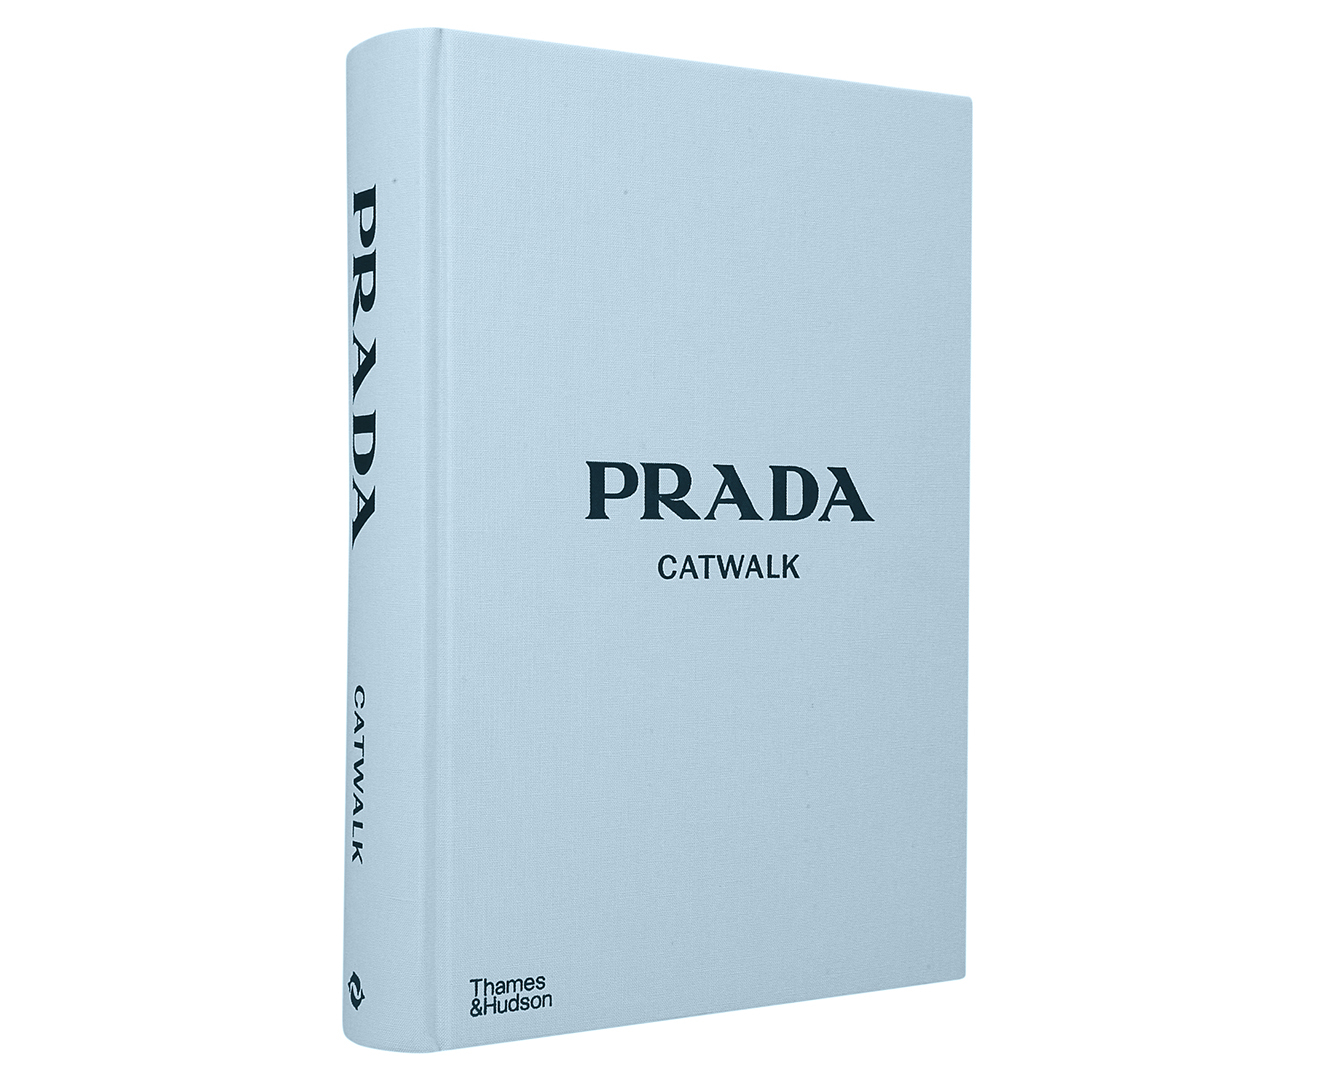 Prada Catwalk: The Complete Collection Hardcover Book